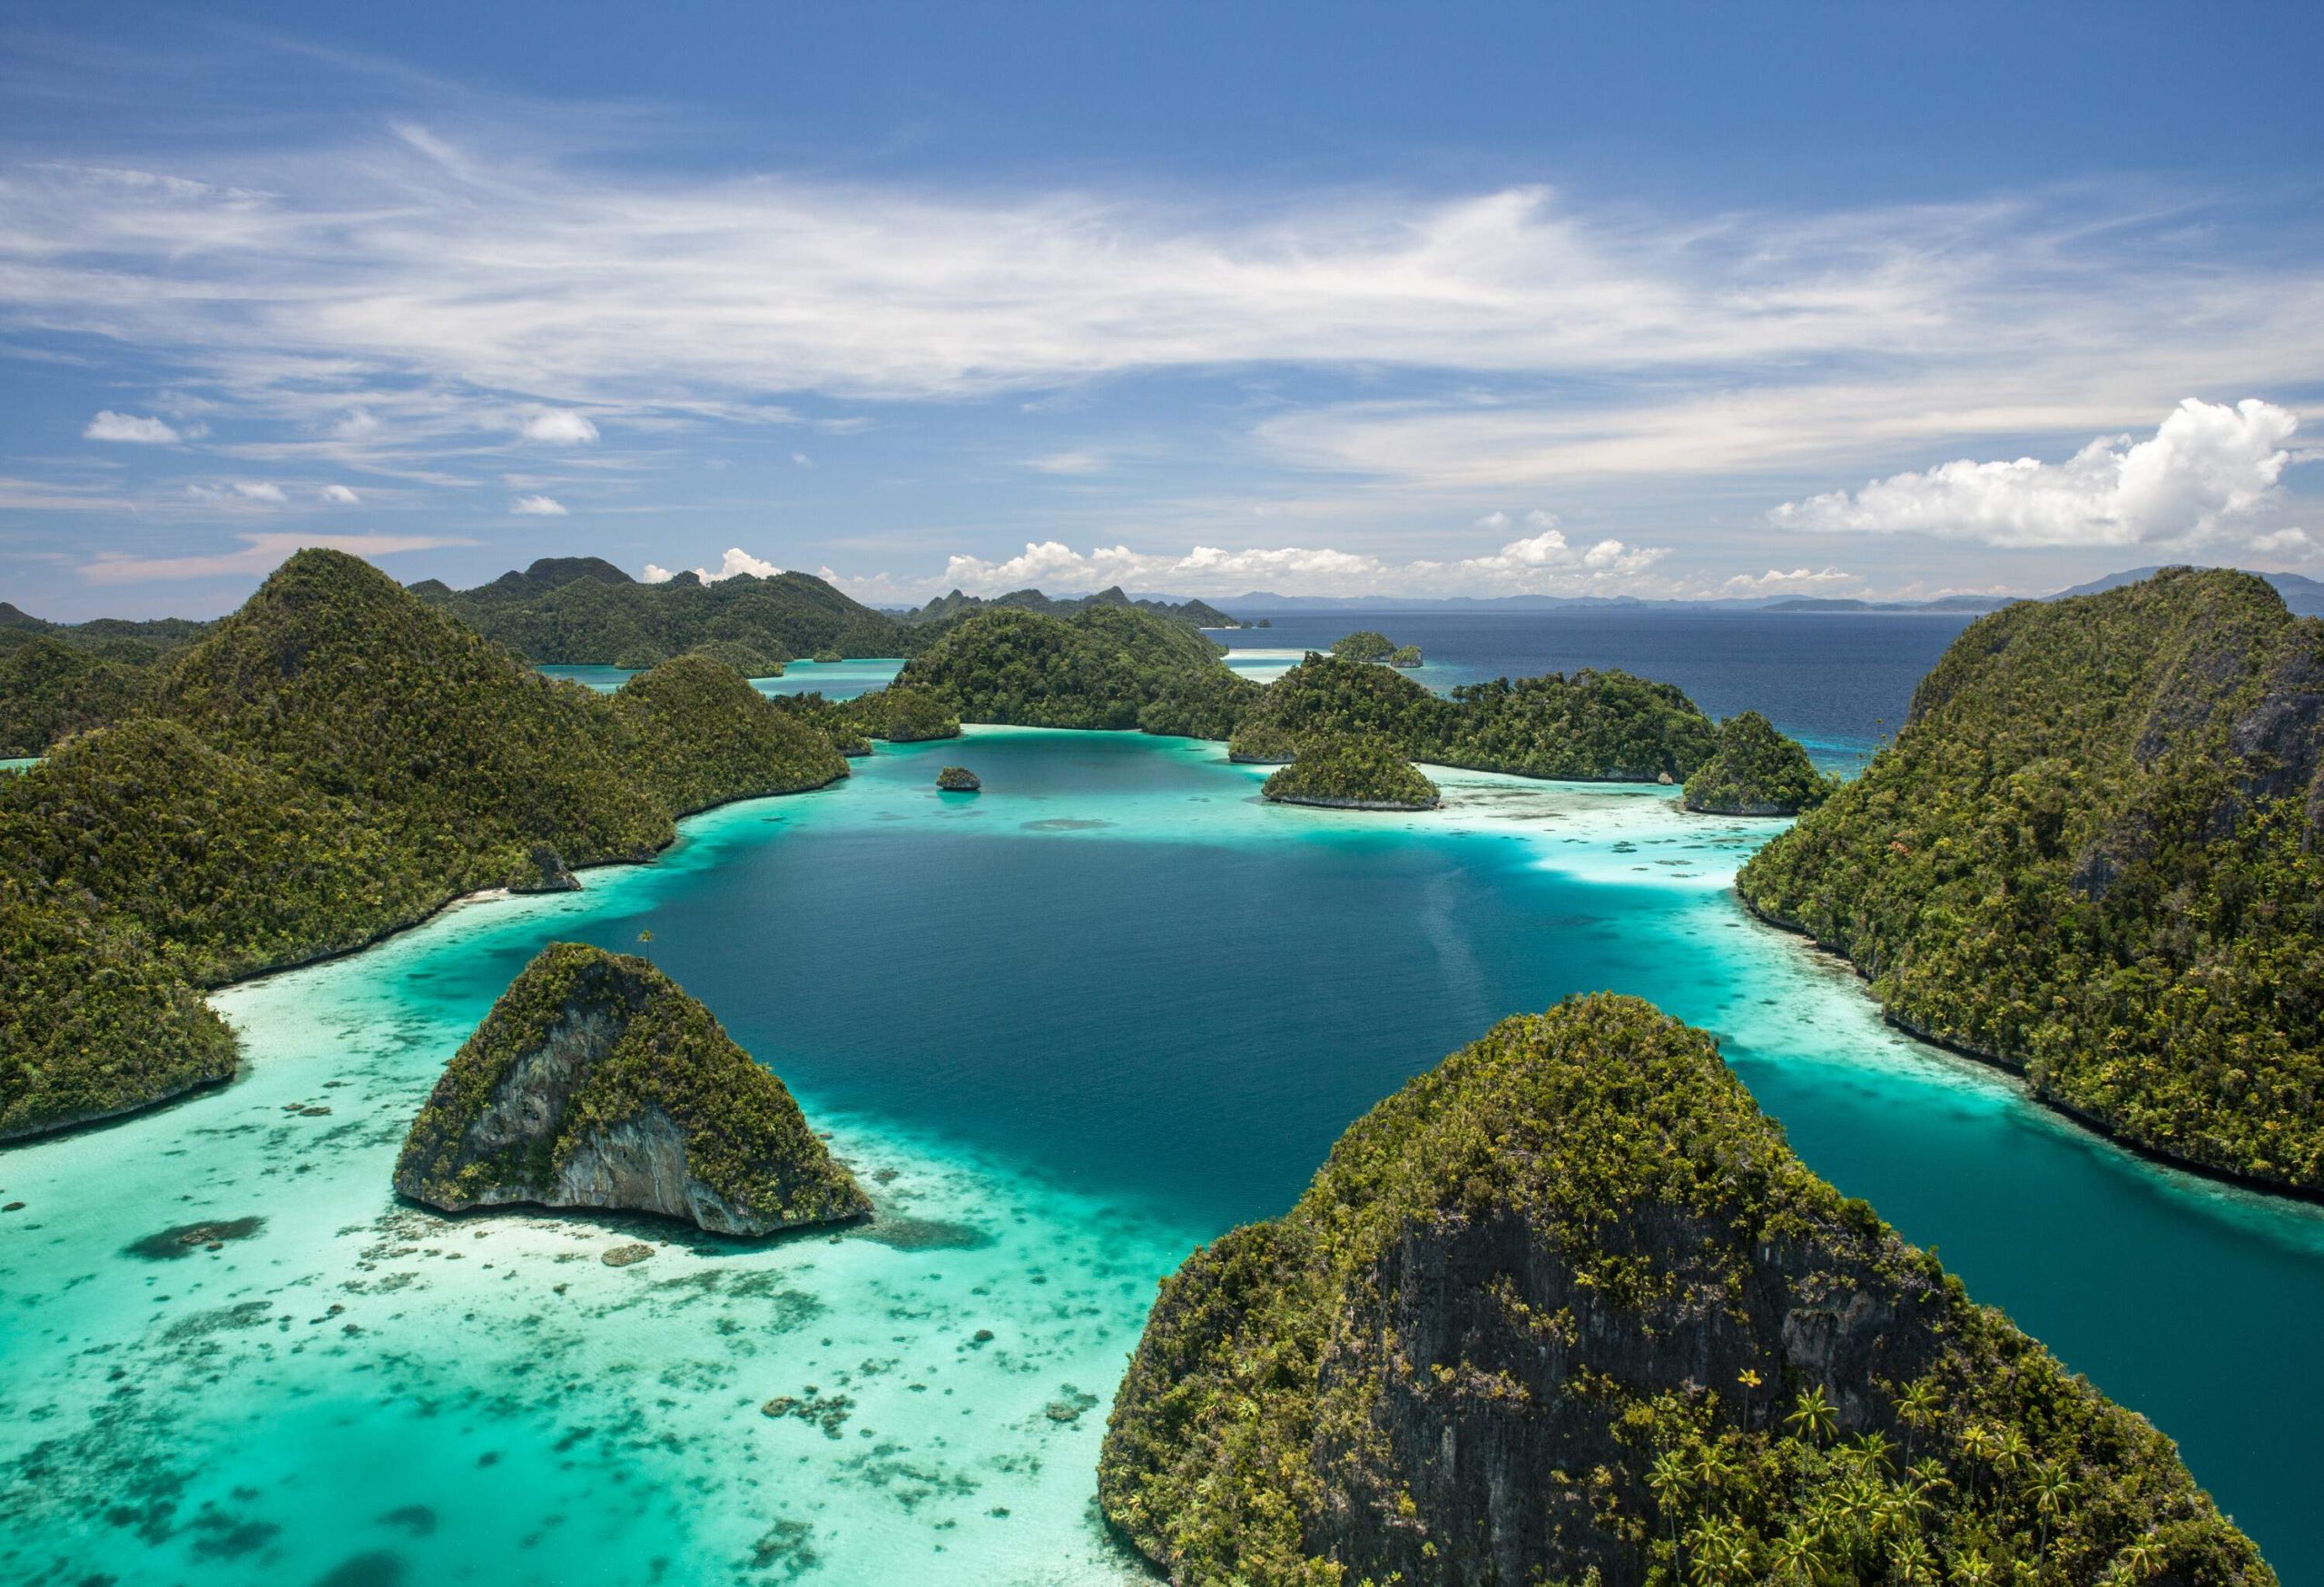 A group of islands of various sizes protrudes from the shallow, crystal clear, tranquil waters.